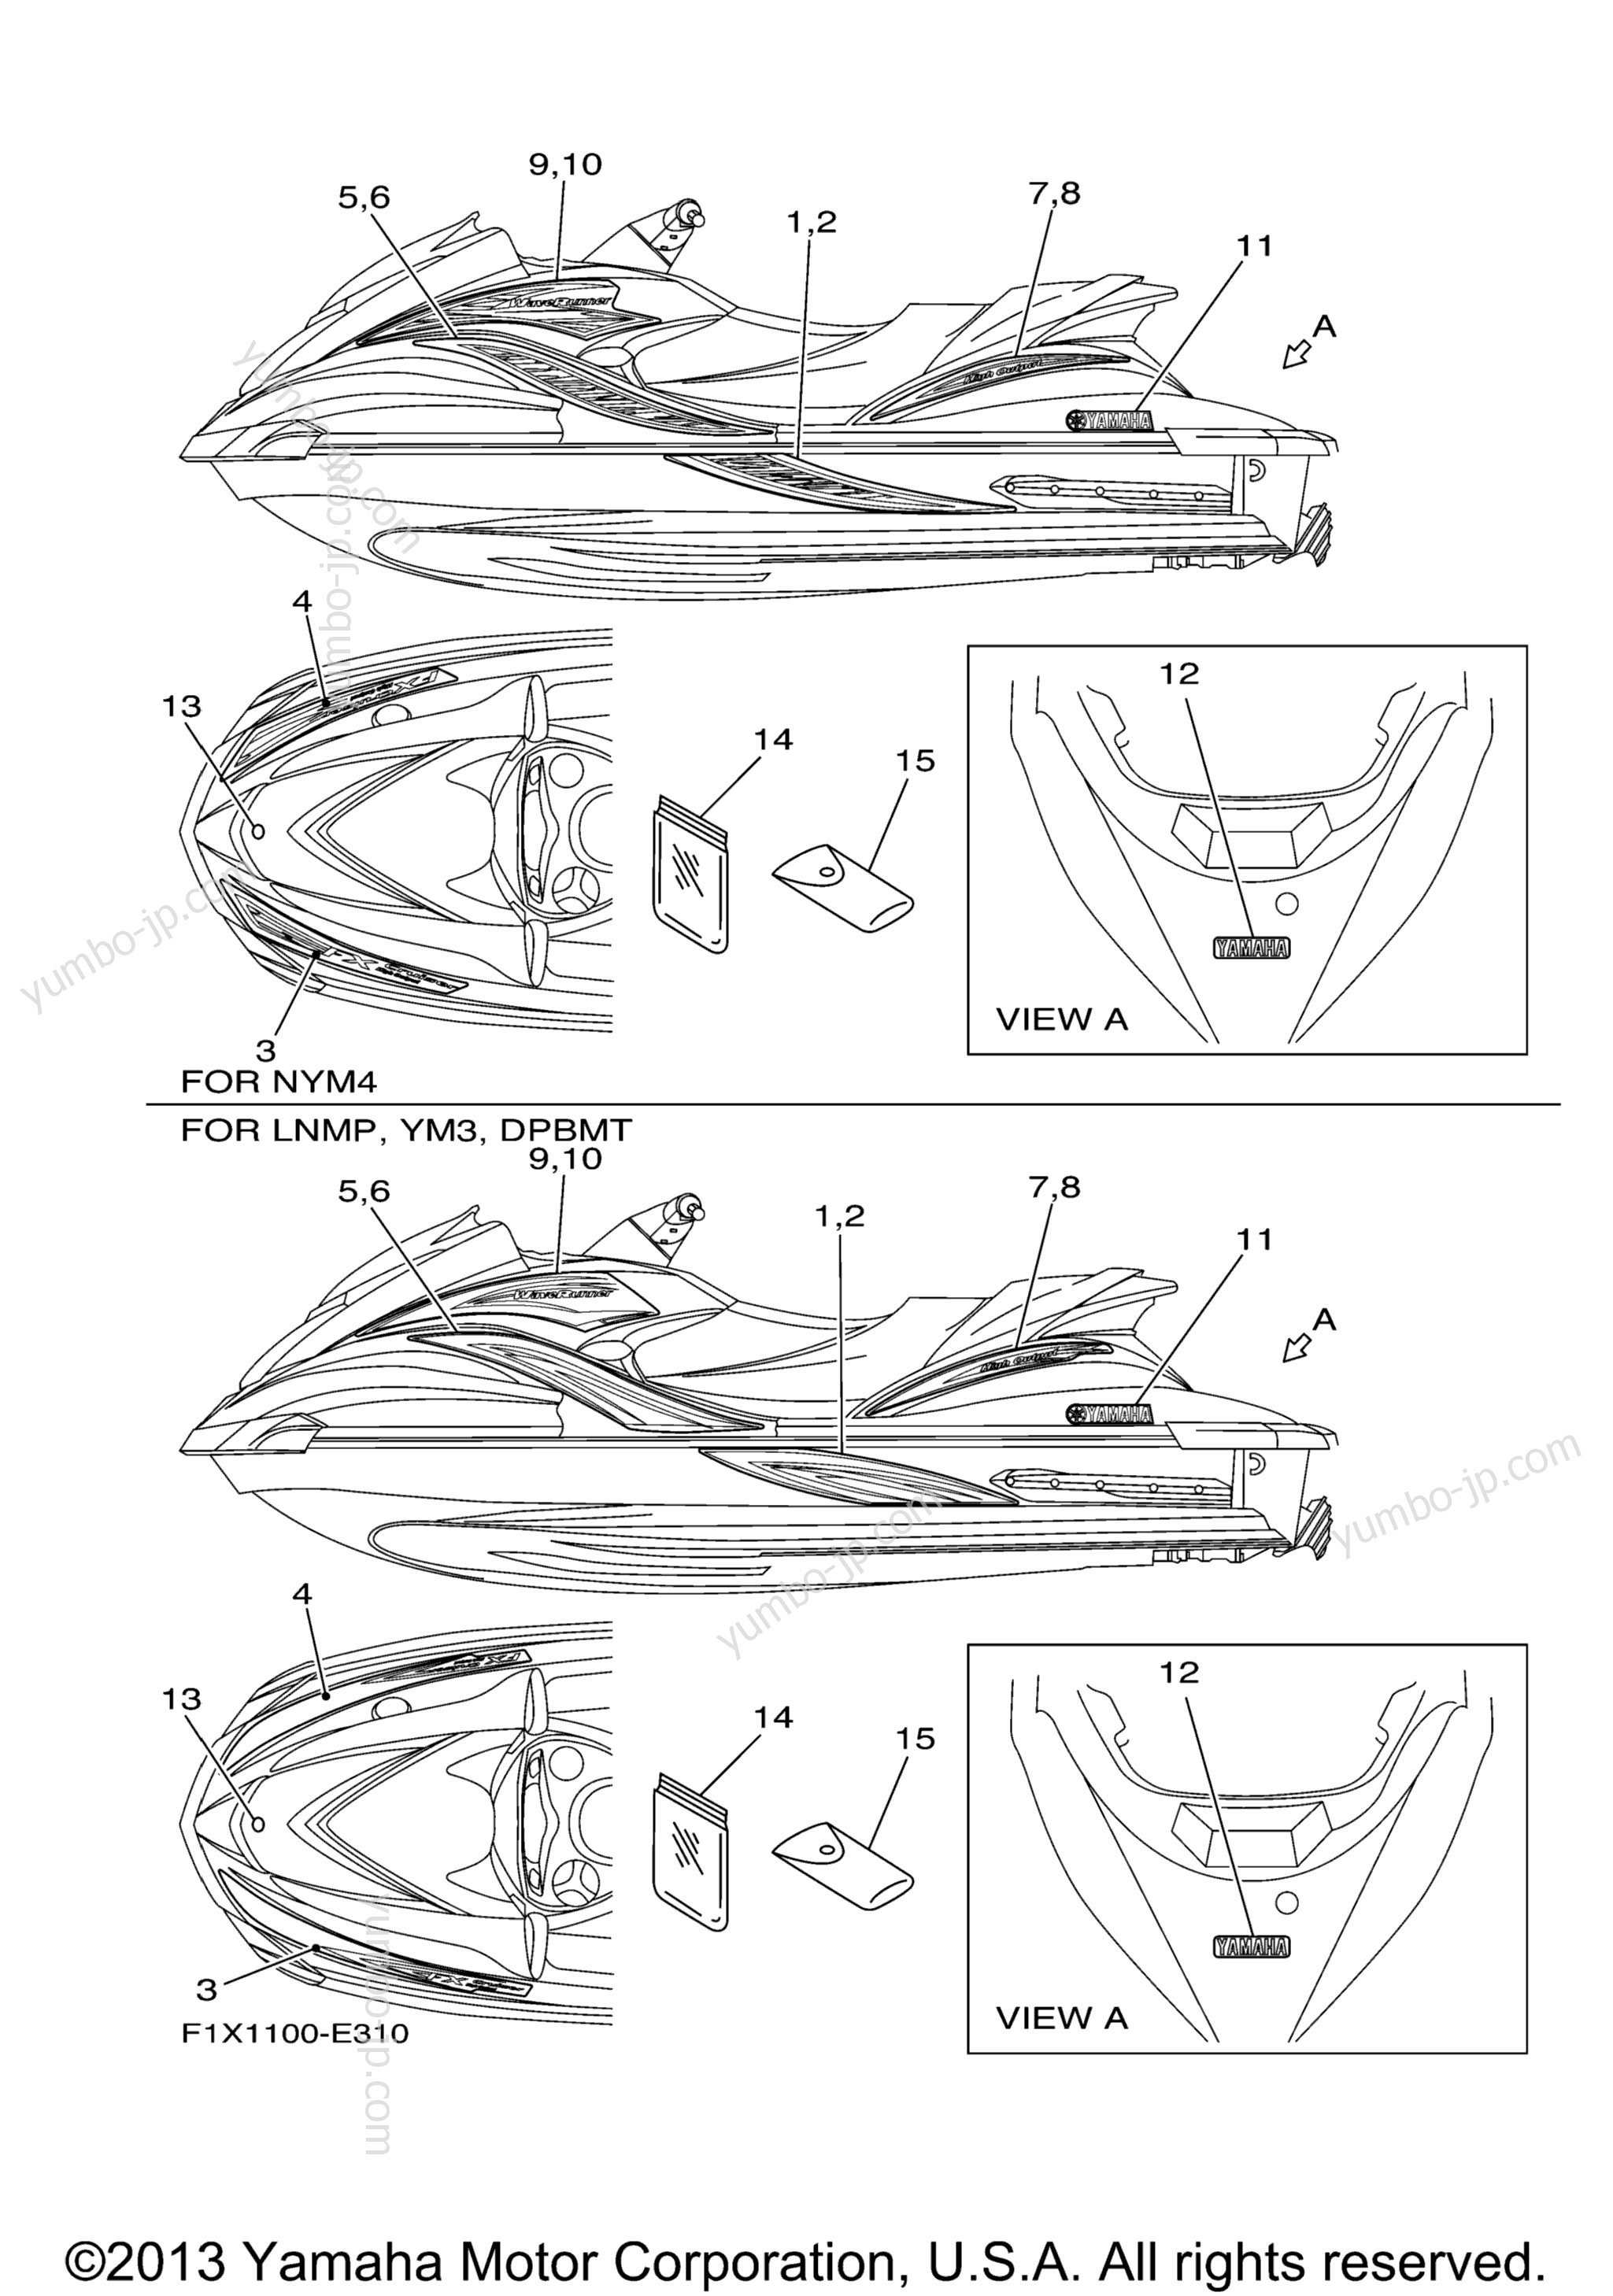 Graphics for watercrafts YAMAHA FX High Output (FX1100E) 2006 year